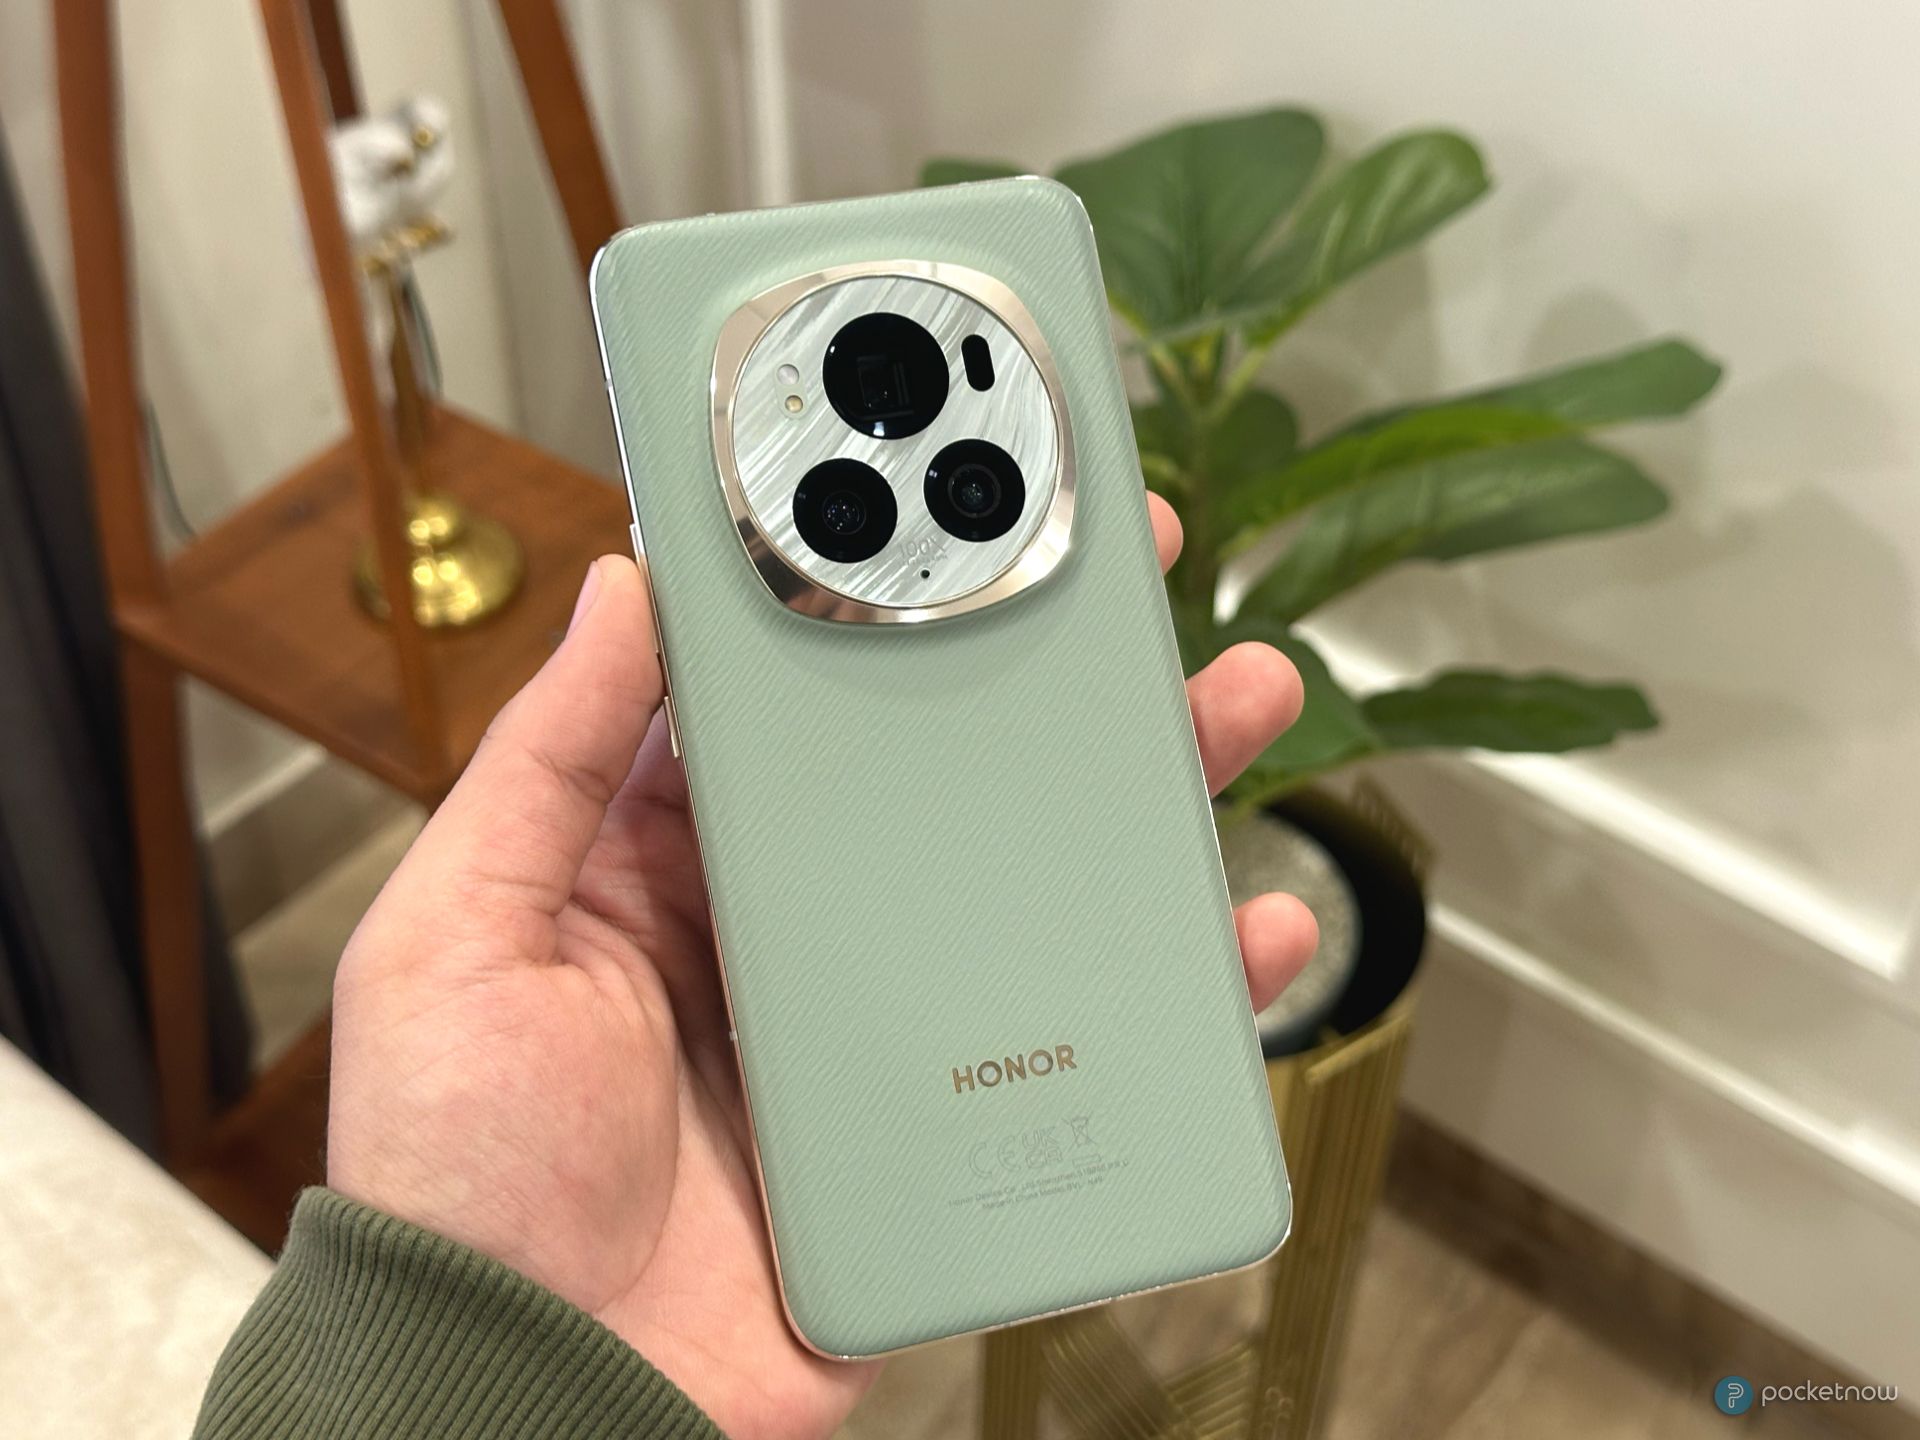 HONOR Magic 6 Pro Hands-on Review: Closing the Gap